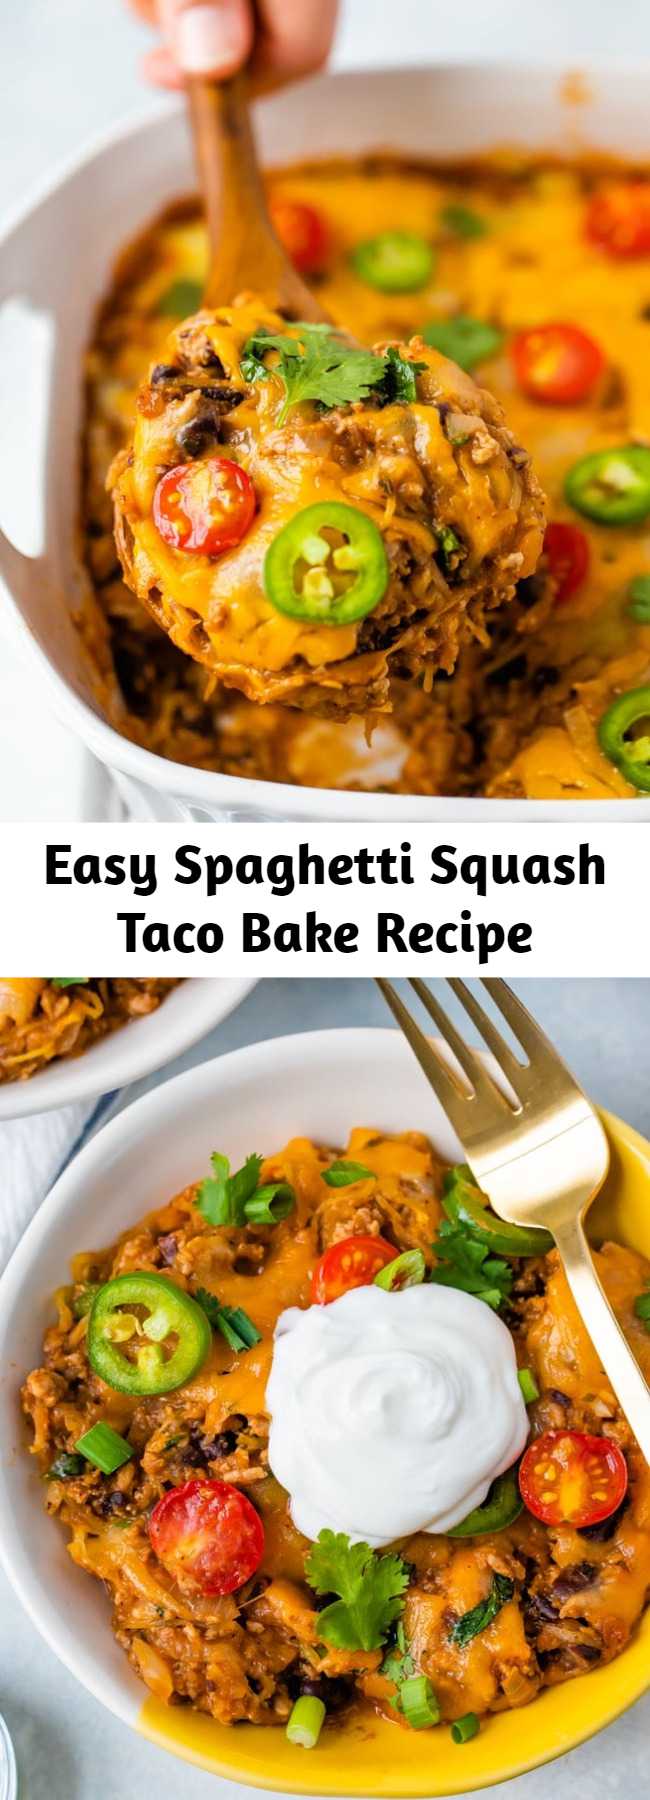 Easy Spaghetti Squash Taco Bake Recipe - This spaghetti squash taco bake combines low-carb spaghetti squash with ground turkey, taco seasoning, salsa and cheese for a delicious, healthy and easy dinner.